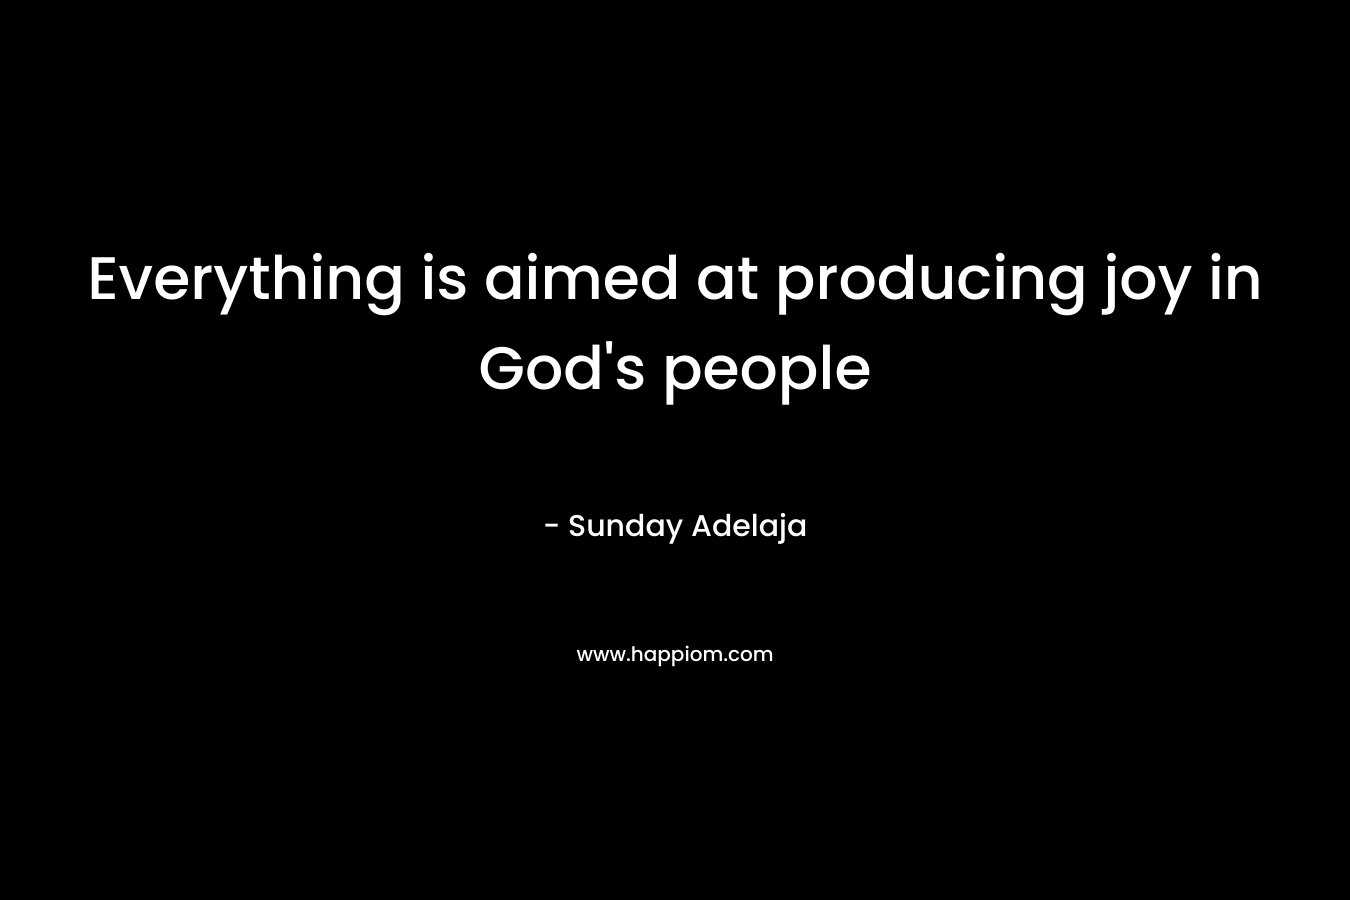 Everything is aimed at producing joy in God's people